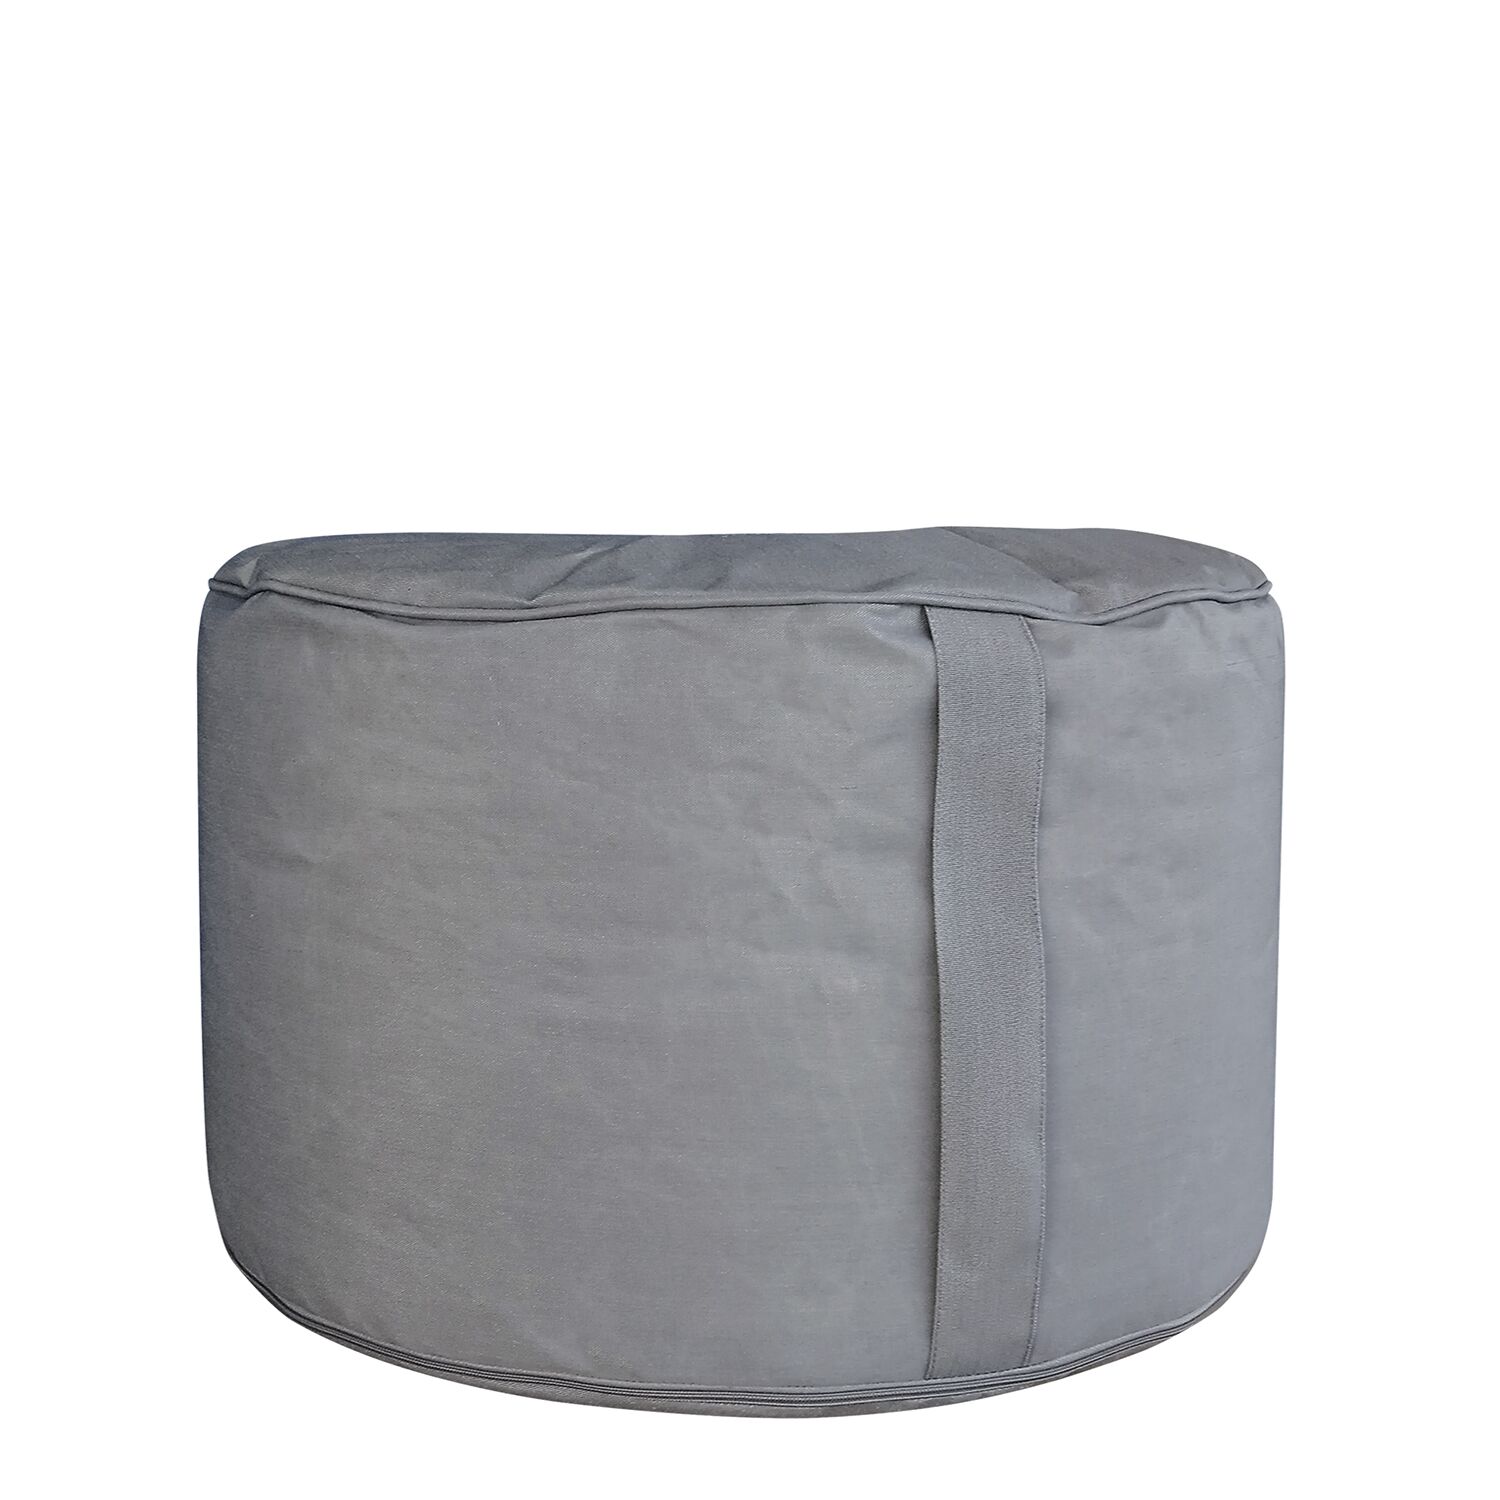 ORIANE Pouf 100% Waterproof With UV Protection Removable Cover Gray Fabric 60x60x34cm